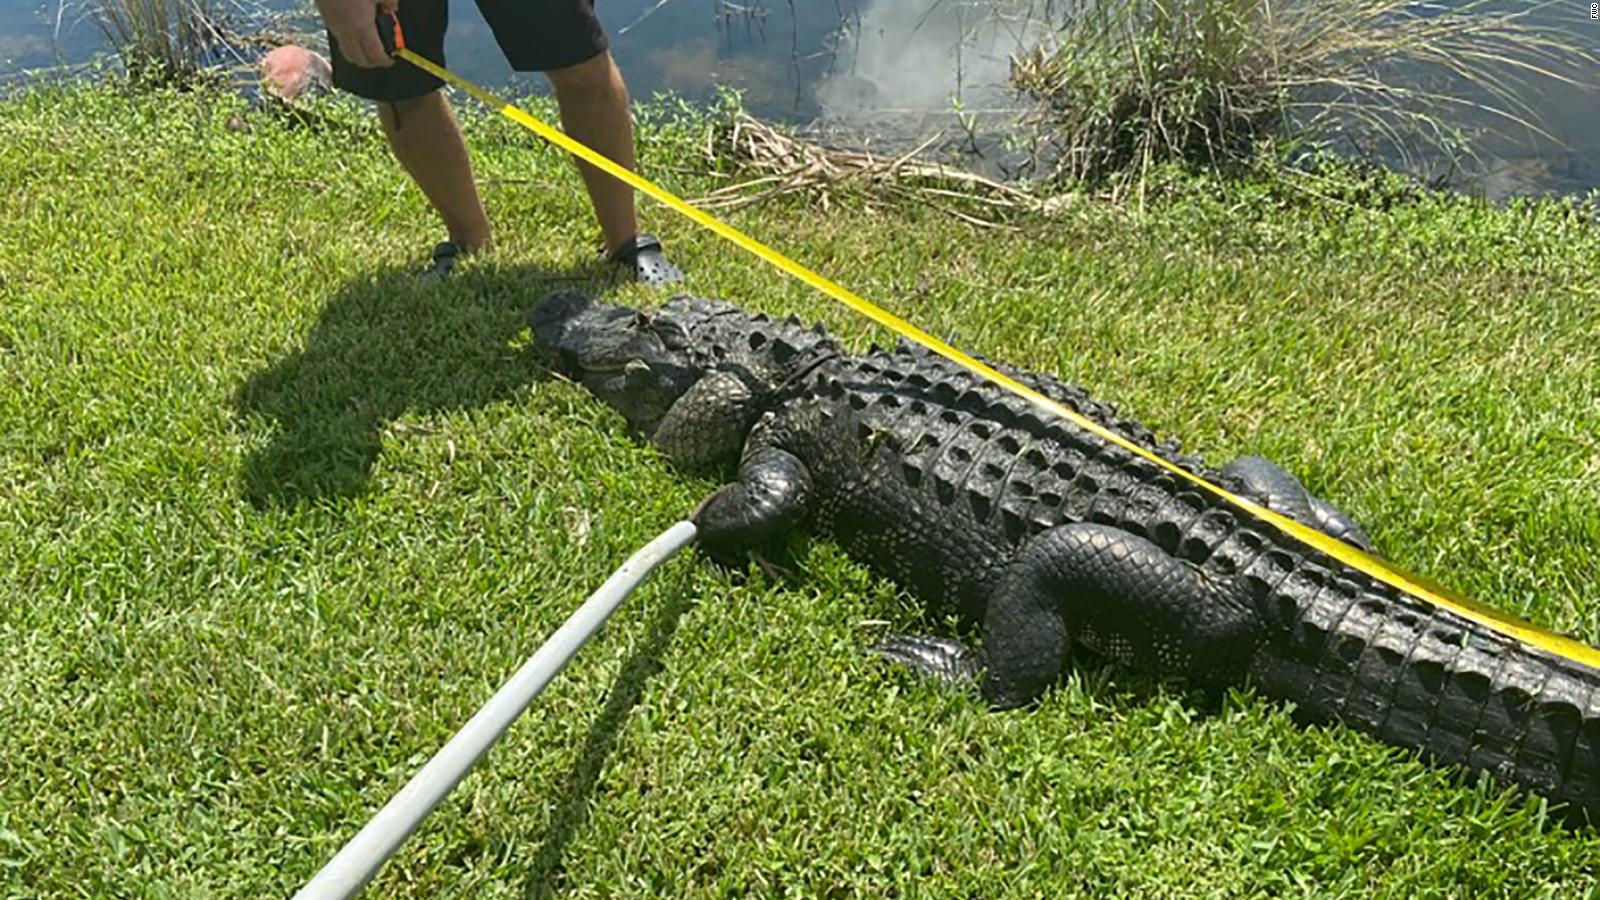 Florida alligator attack A woman was attacked by a 10foot alligator